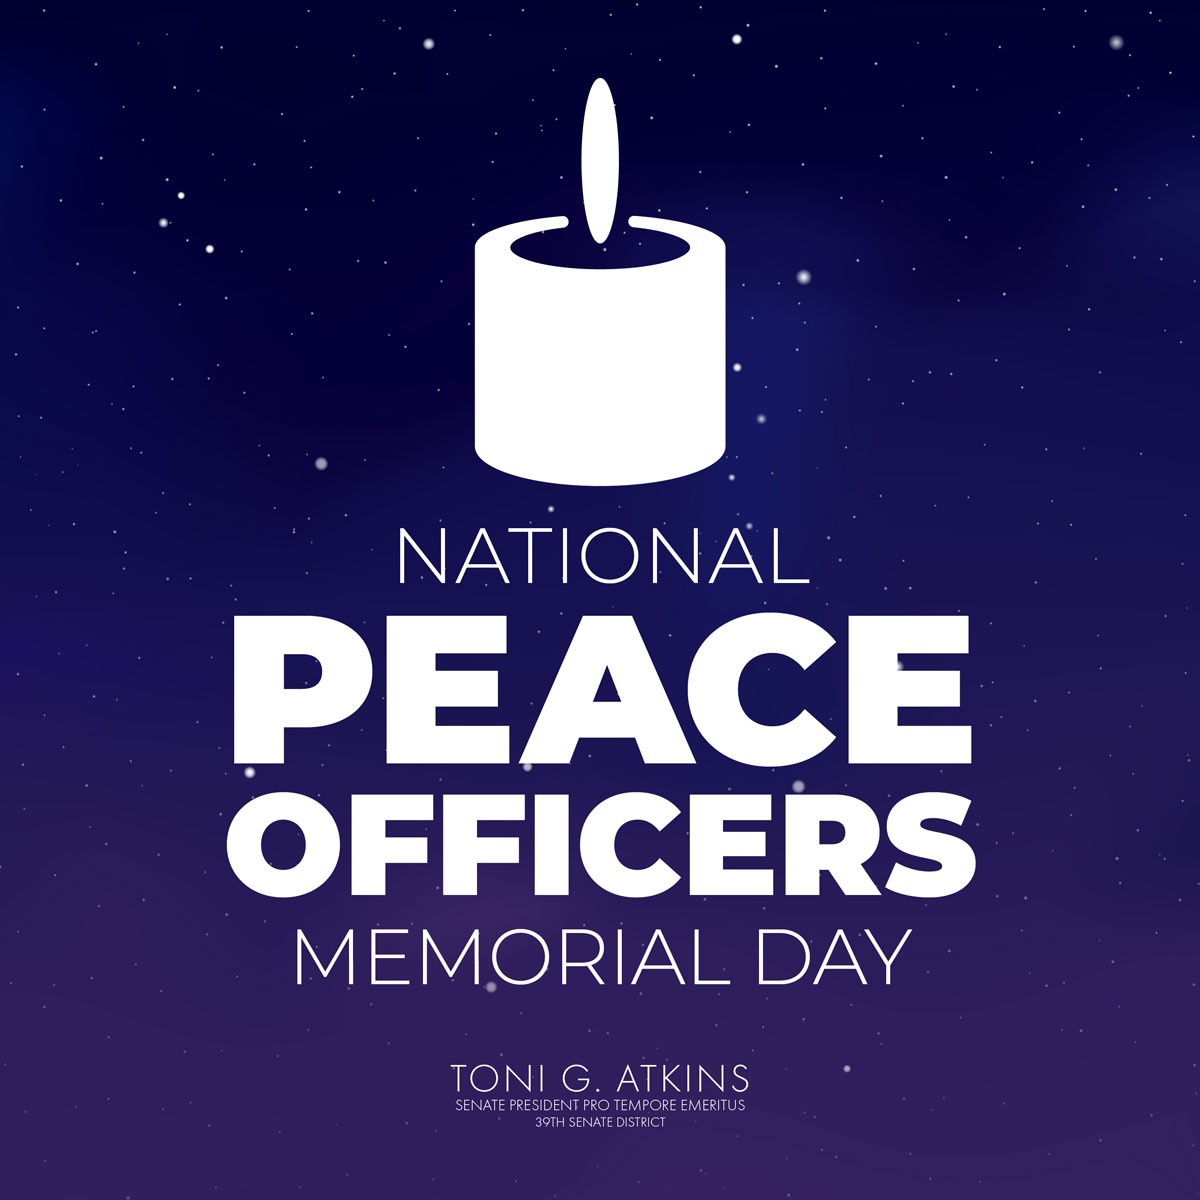 Today, the Senate passed #SCR110 to recognize #PeaceOfficersMemorialDay. We remember the peace officers who have lost their lives in the line of duty and the families and communities impacted by these tragic losses.